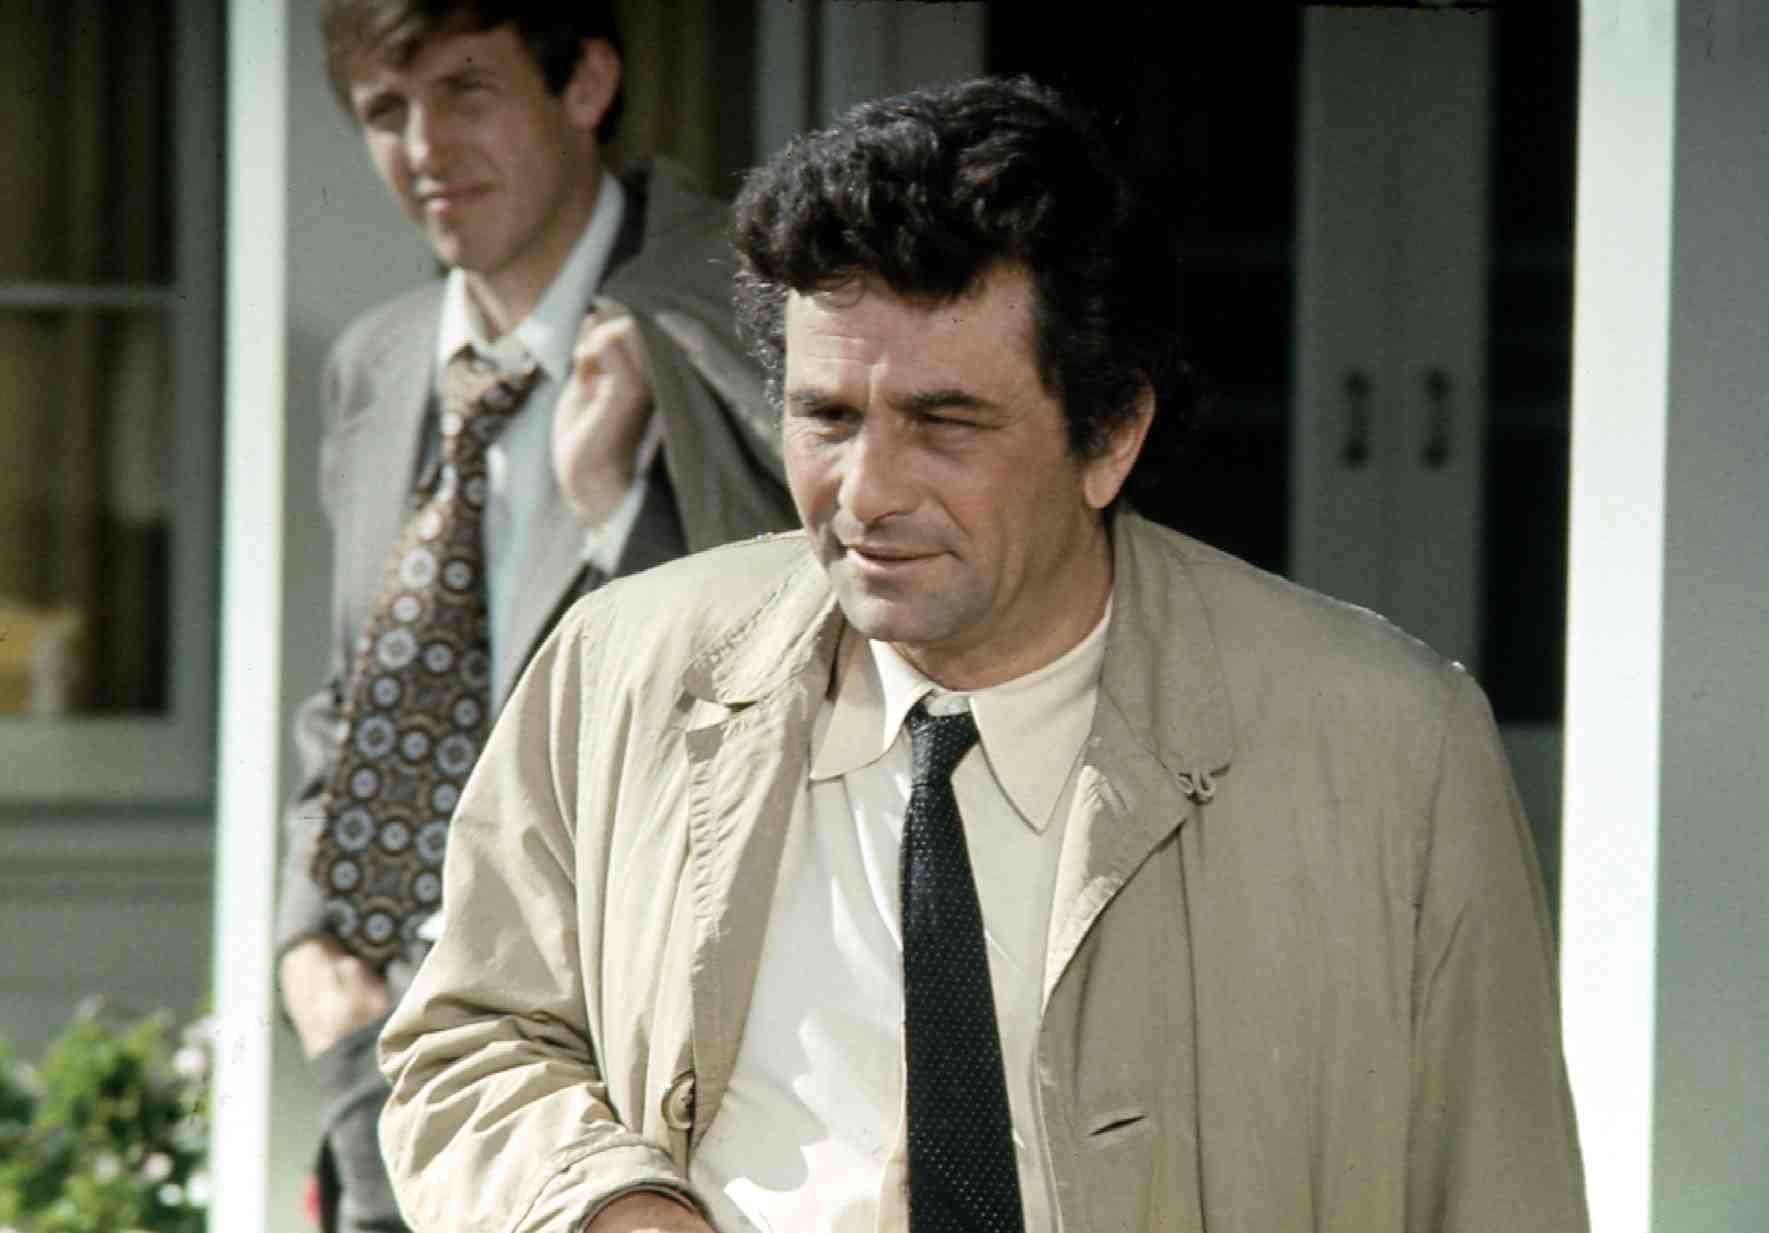 Peter Falk in front of a man